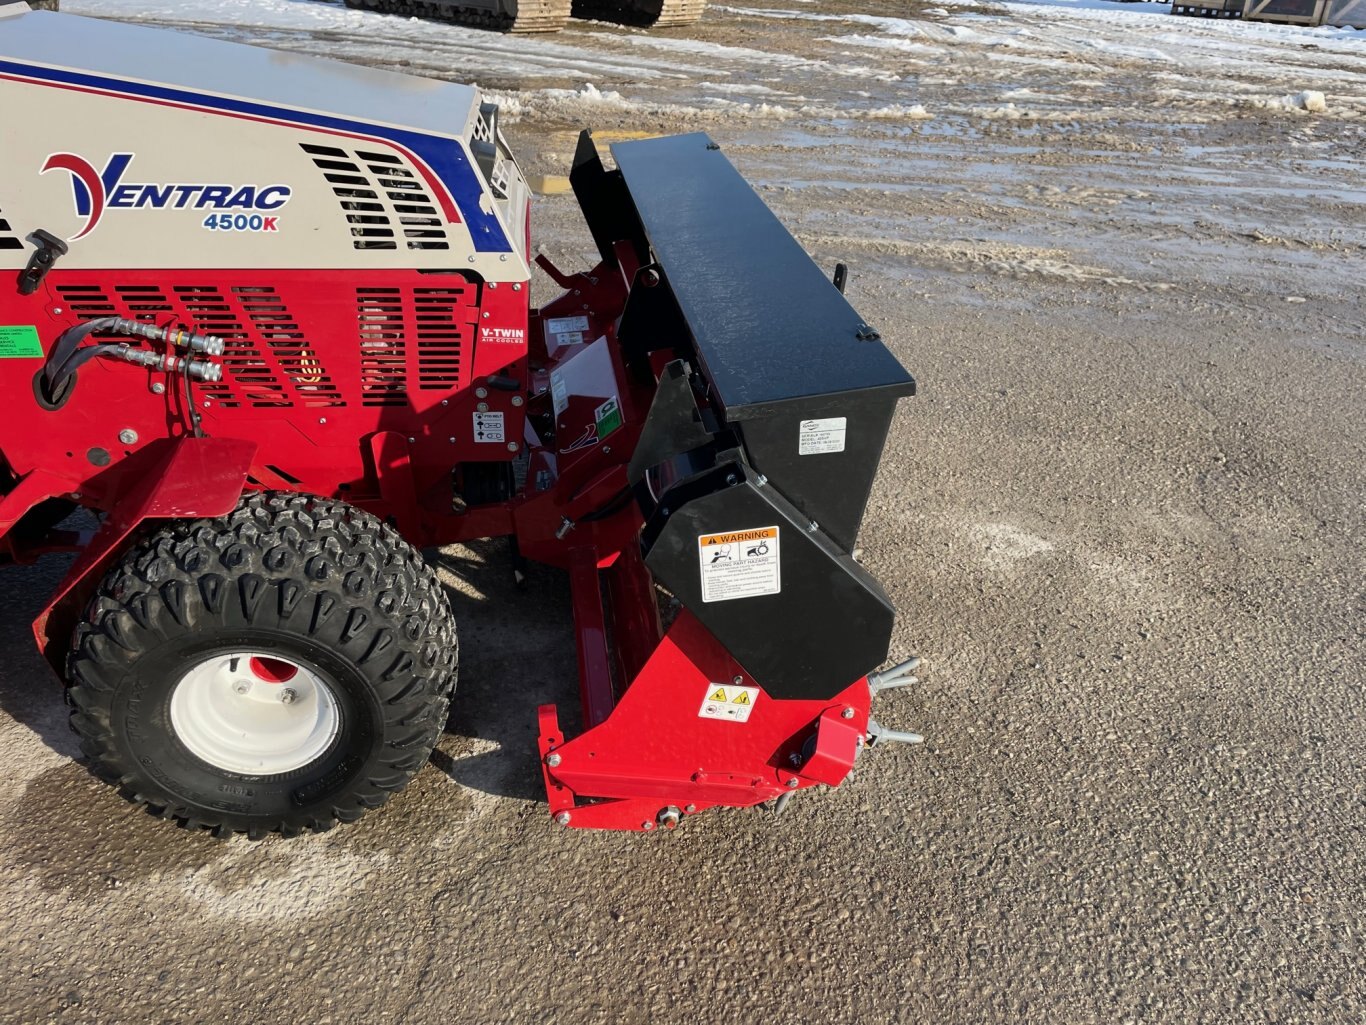 Ventrac EA600 Aera vator with Seed Box and Roller